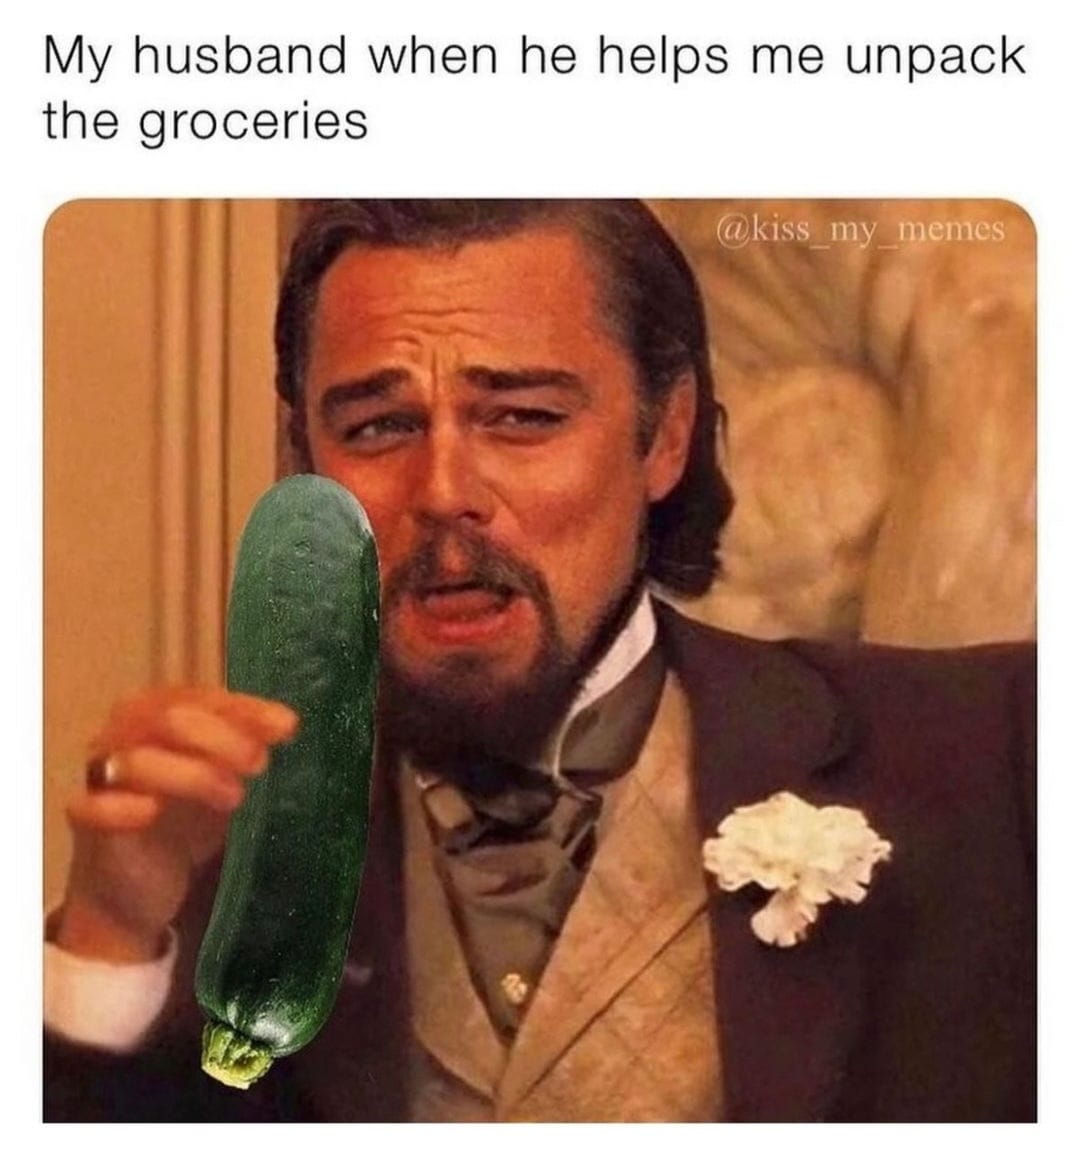 My husband when he helps me unpack the groceries (Leonardo sniggering over a cucumber)